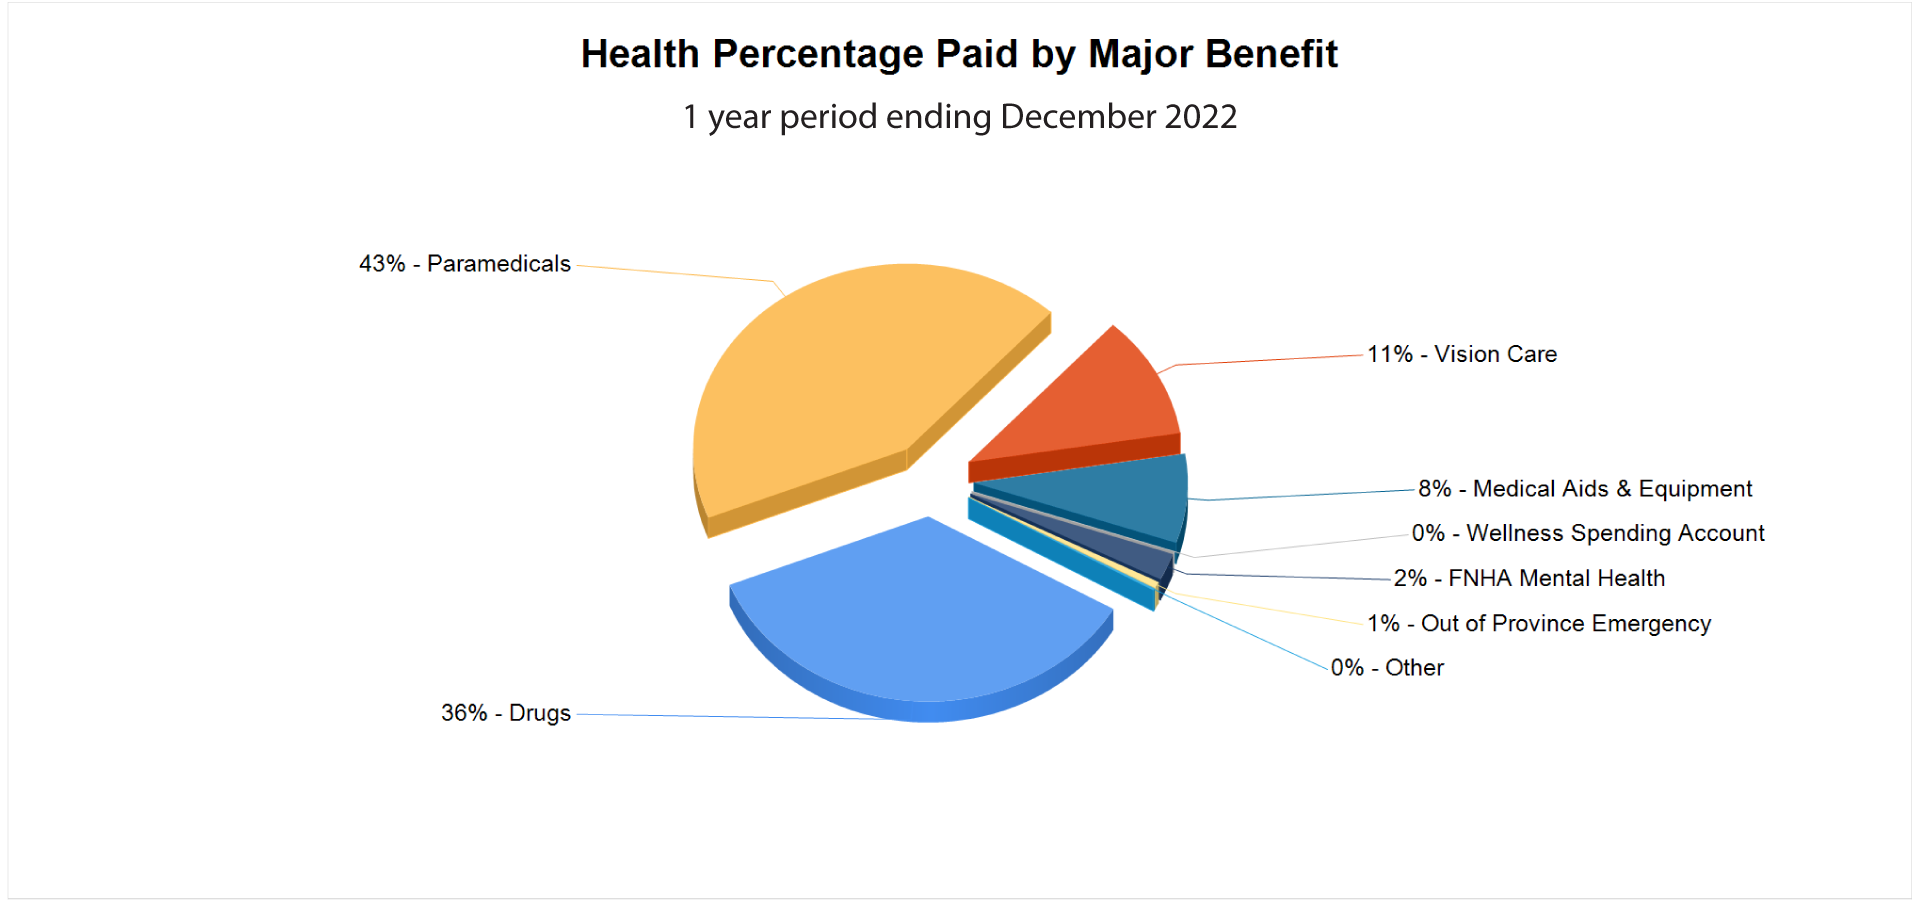 Health Percentage Paid By Major Benefit